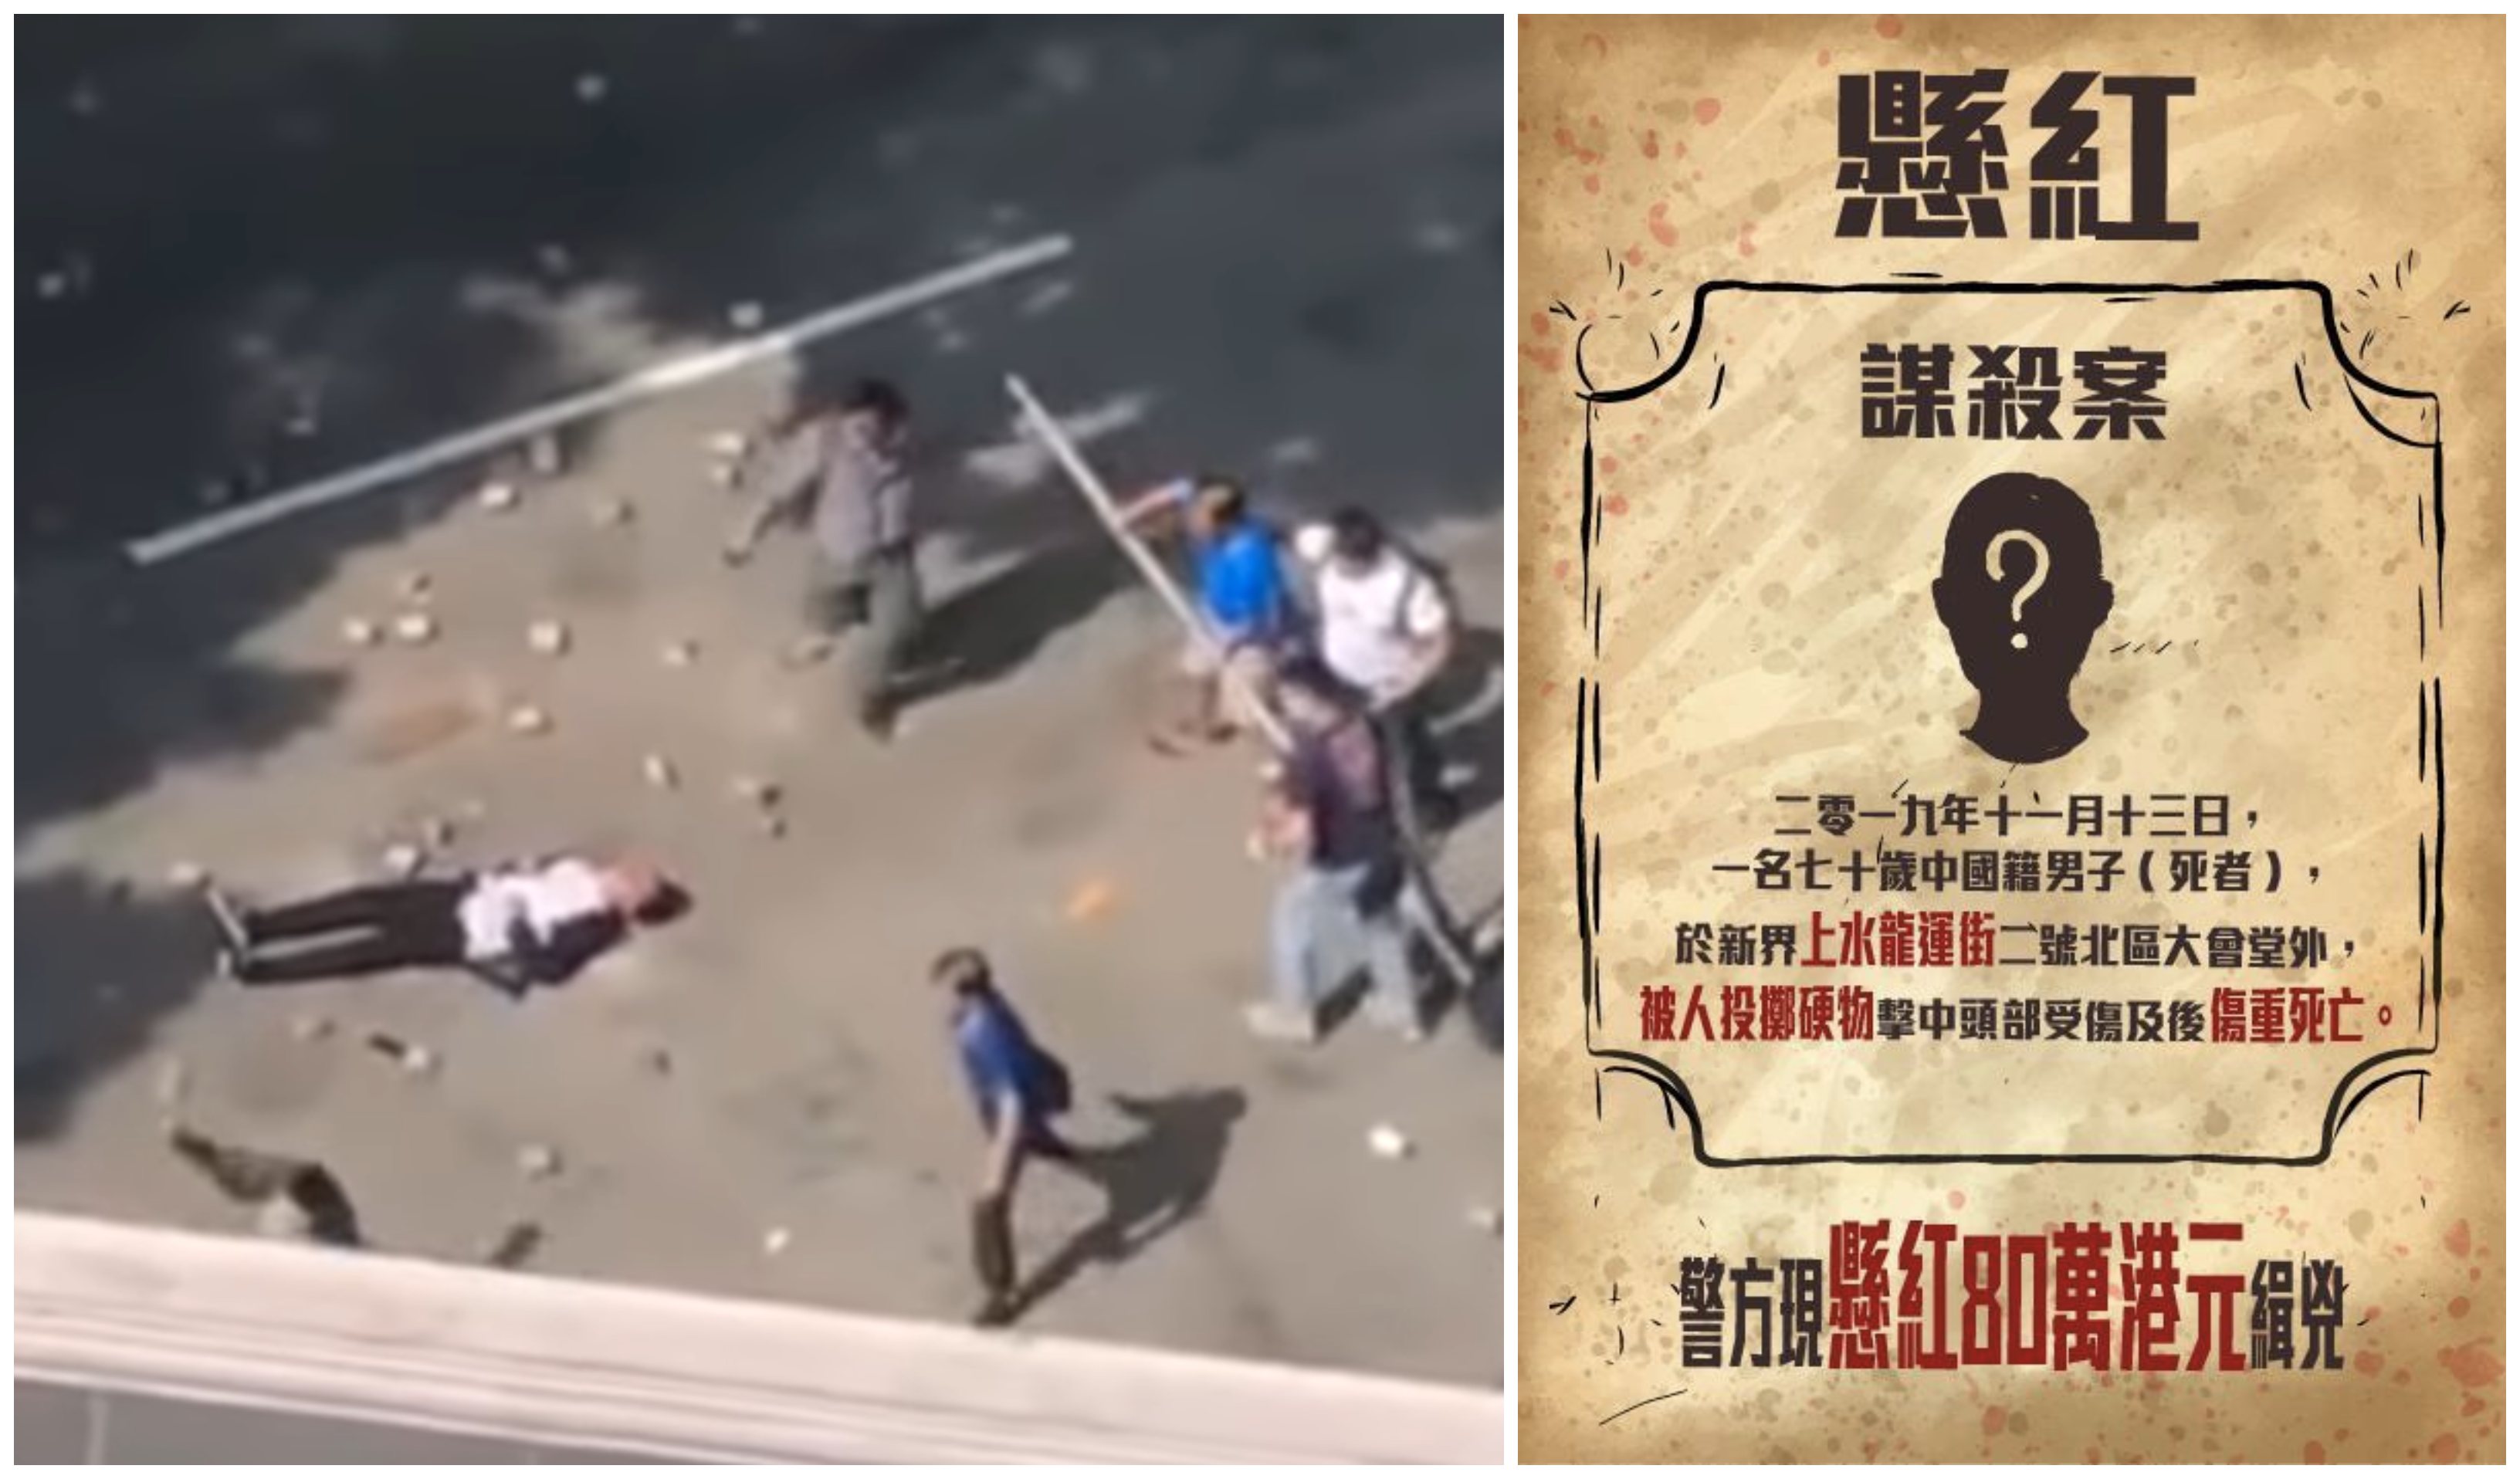 Law Cheung Ching seen sprawled on the ground after being struck with a flying brick last month (left); and a police post announcing a reward for information leading to the arrest of the person who threw the brick (right). Screengrabs via YouTube/Facebook.